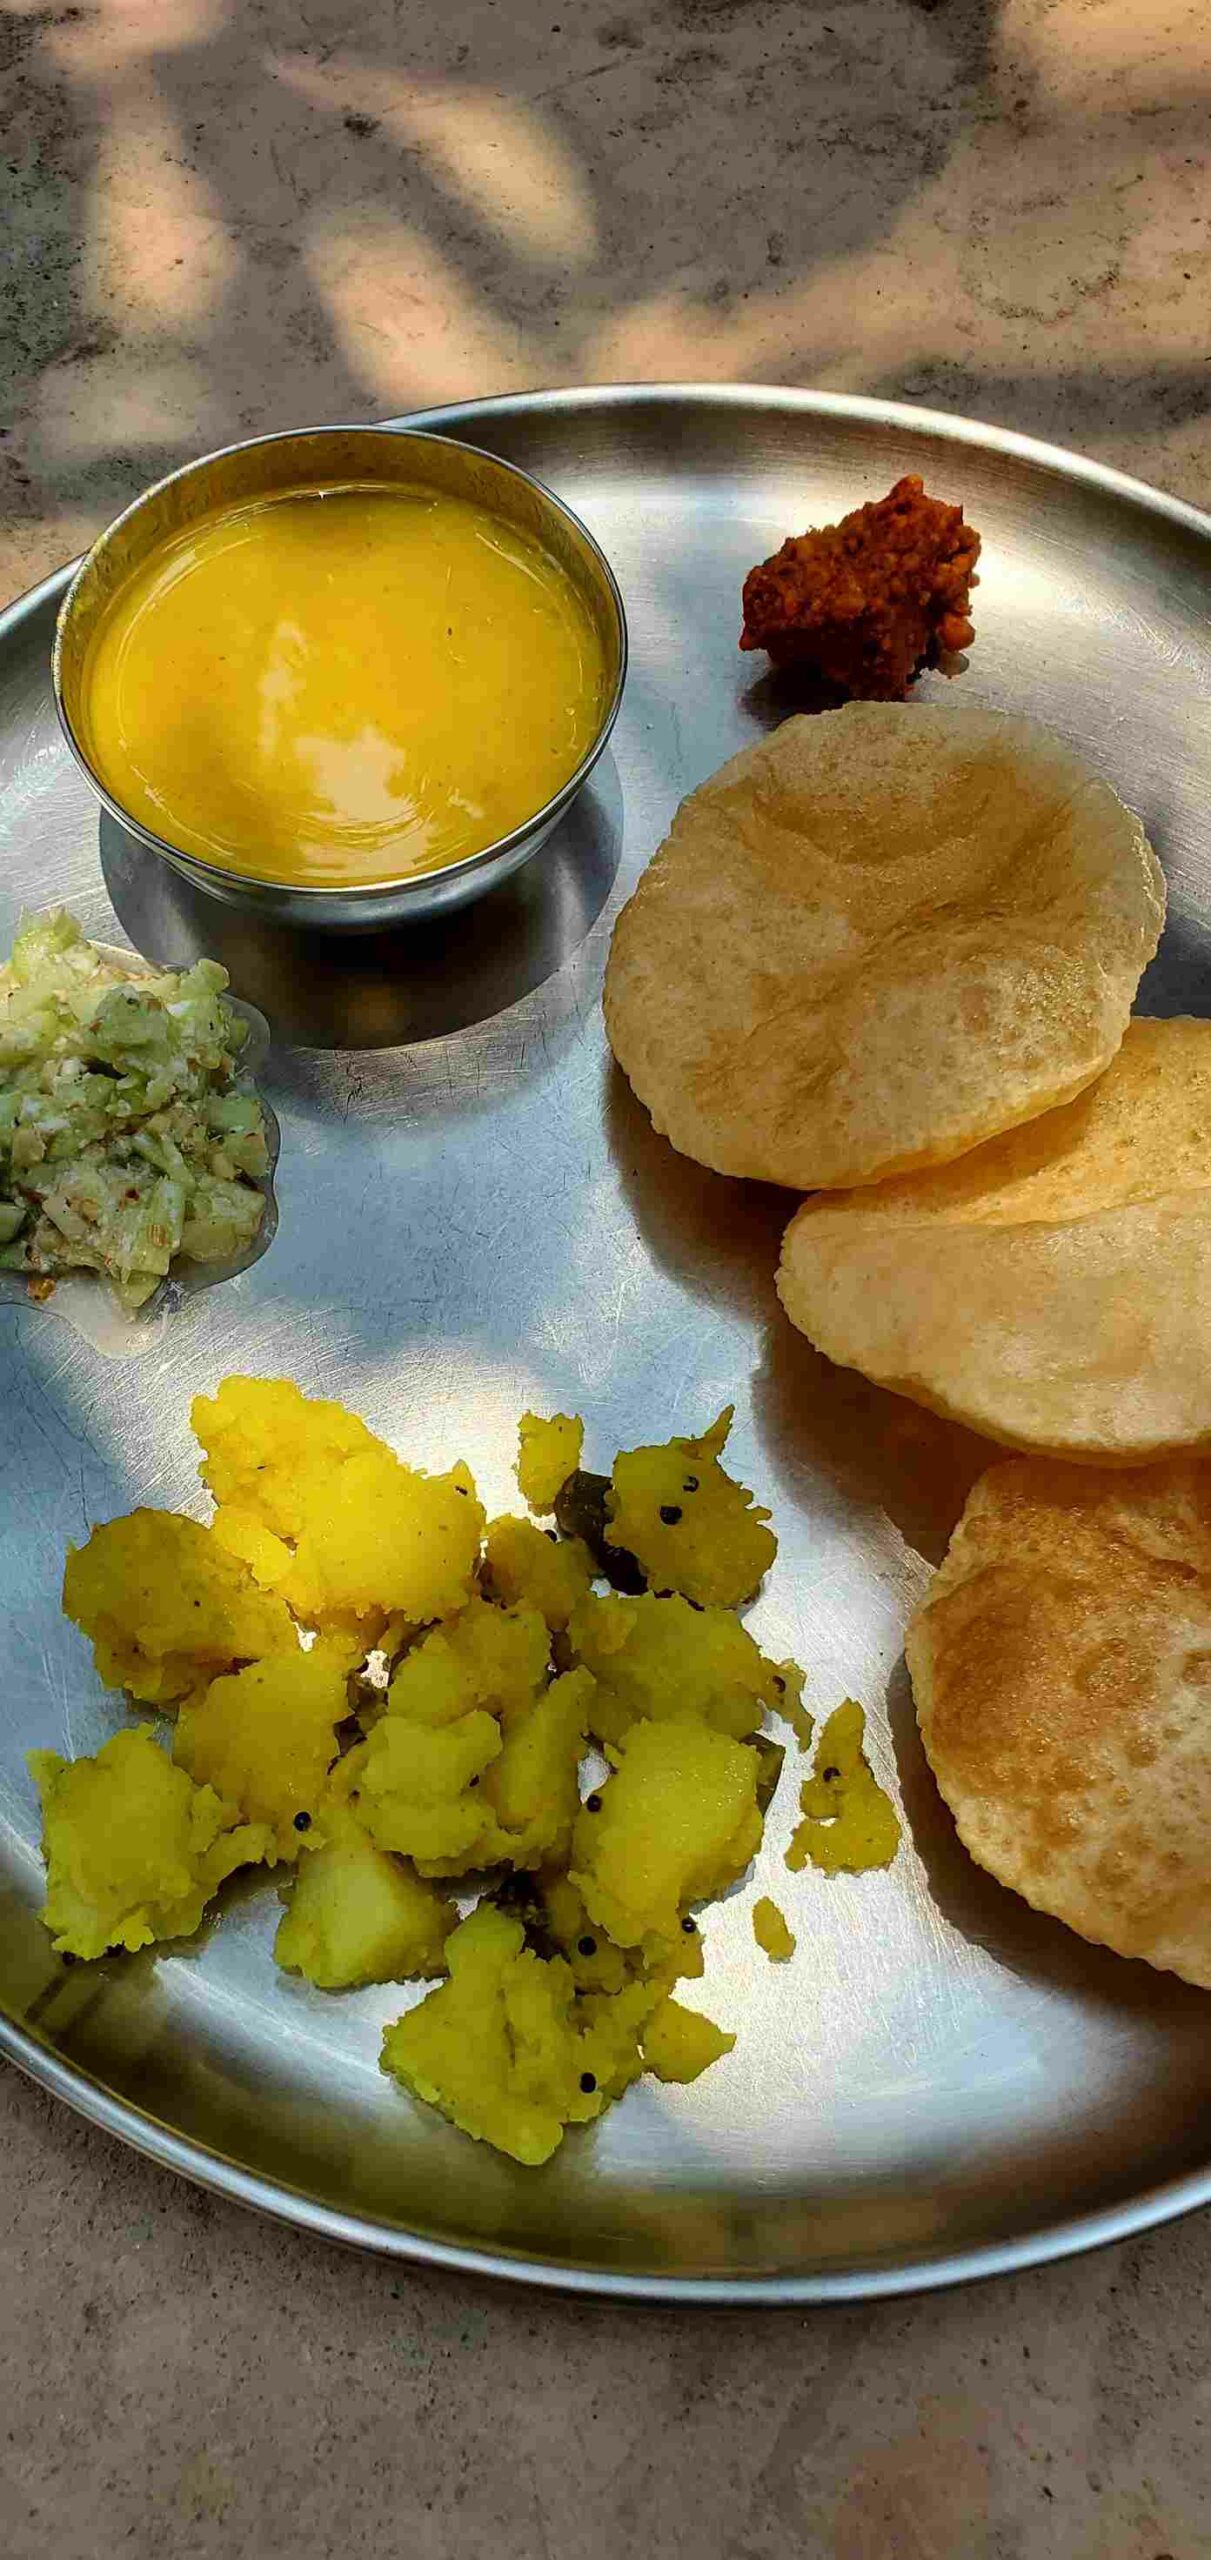 The meals at the farmstay include authentic Maharashtrian fare cooked by the local women